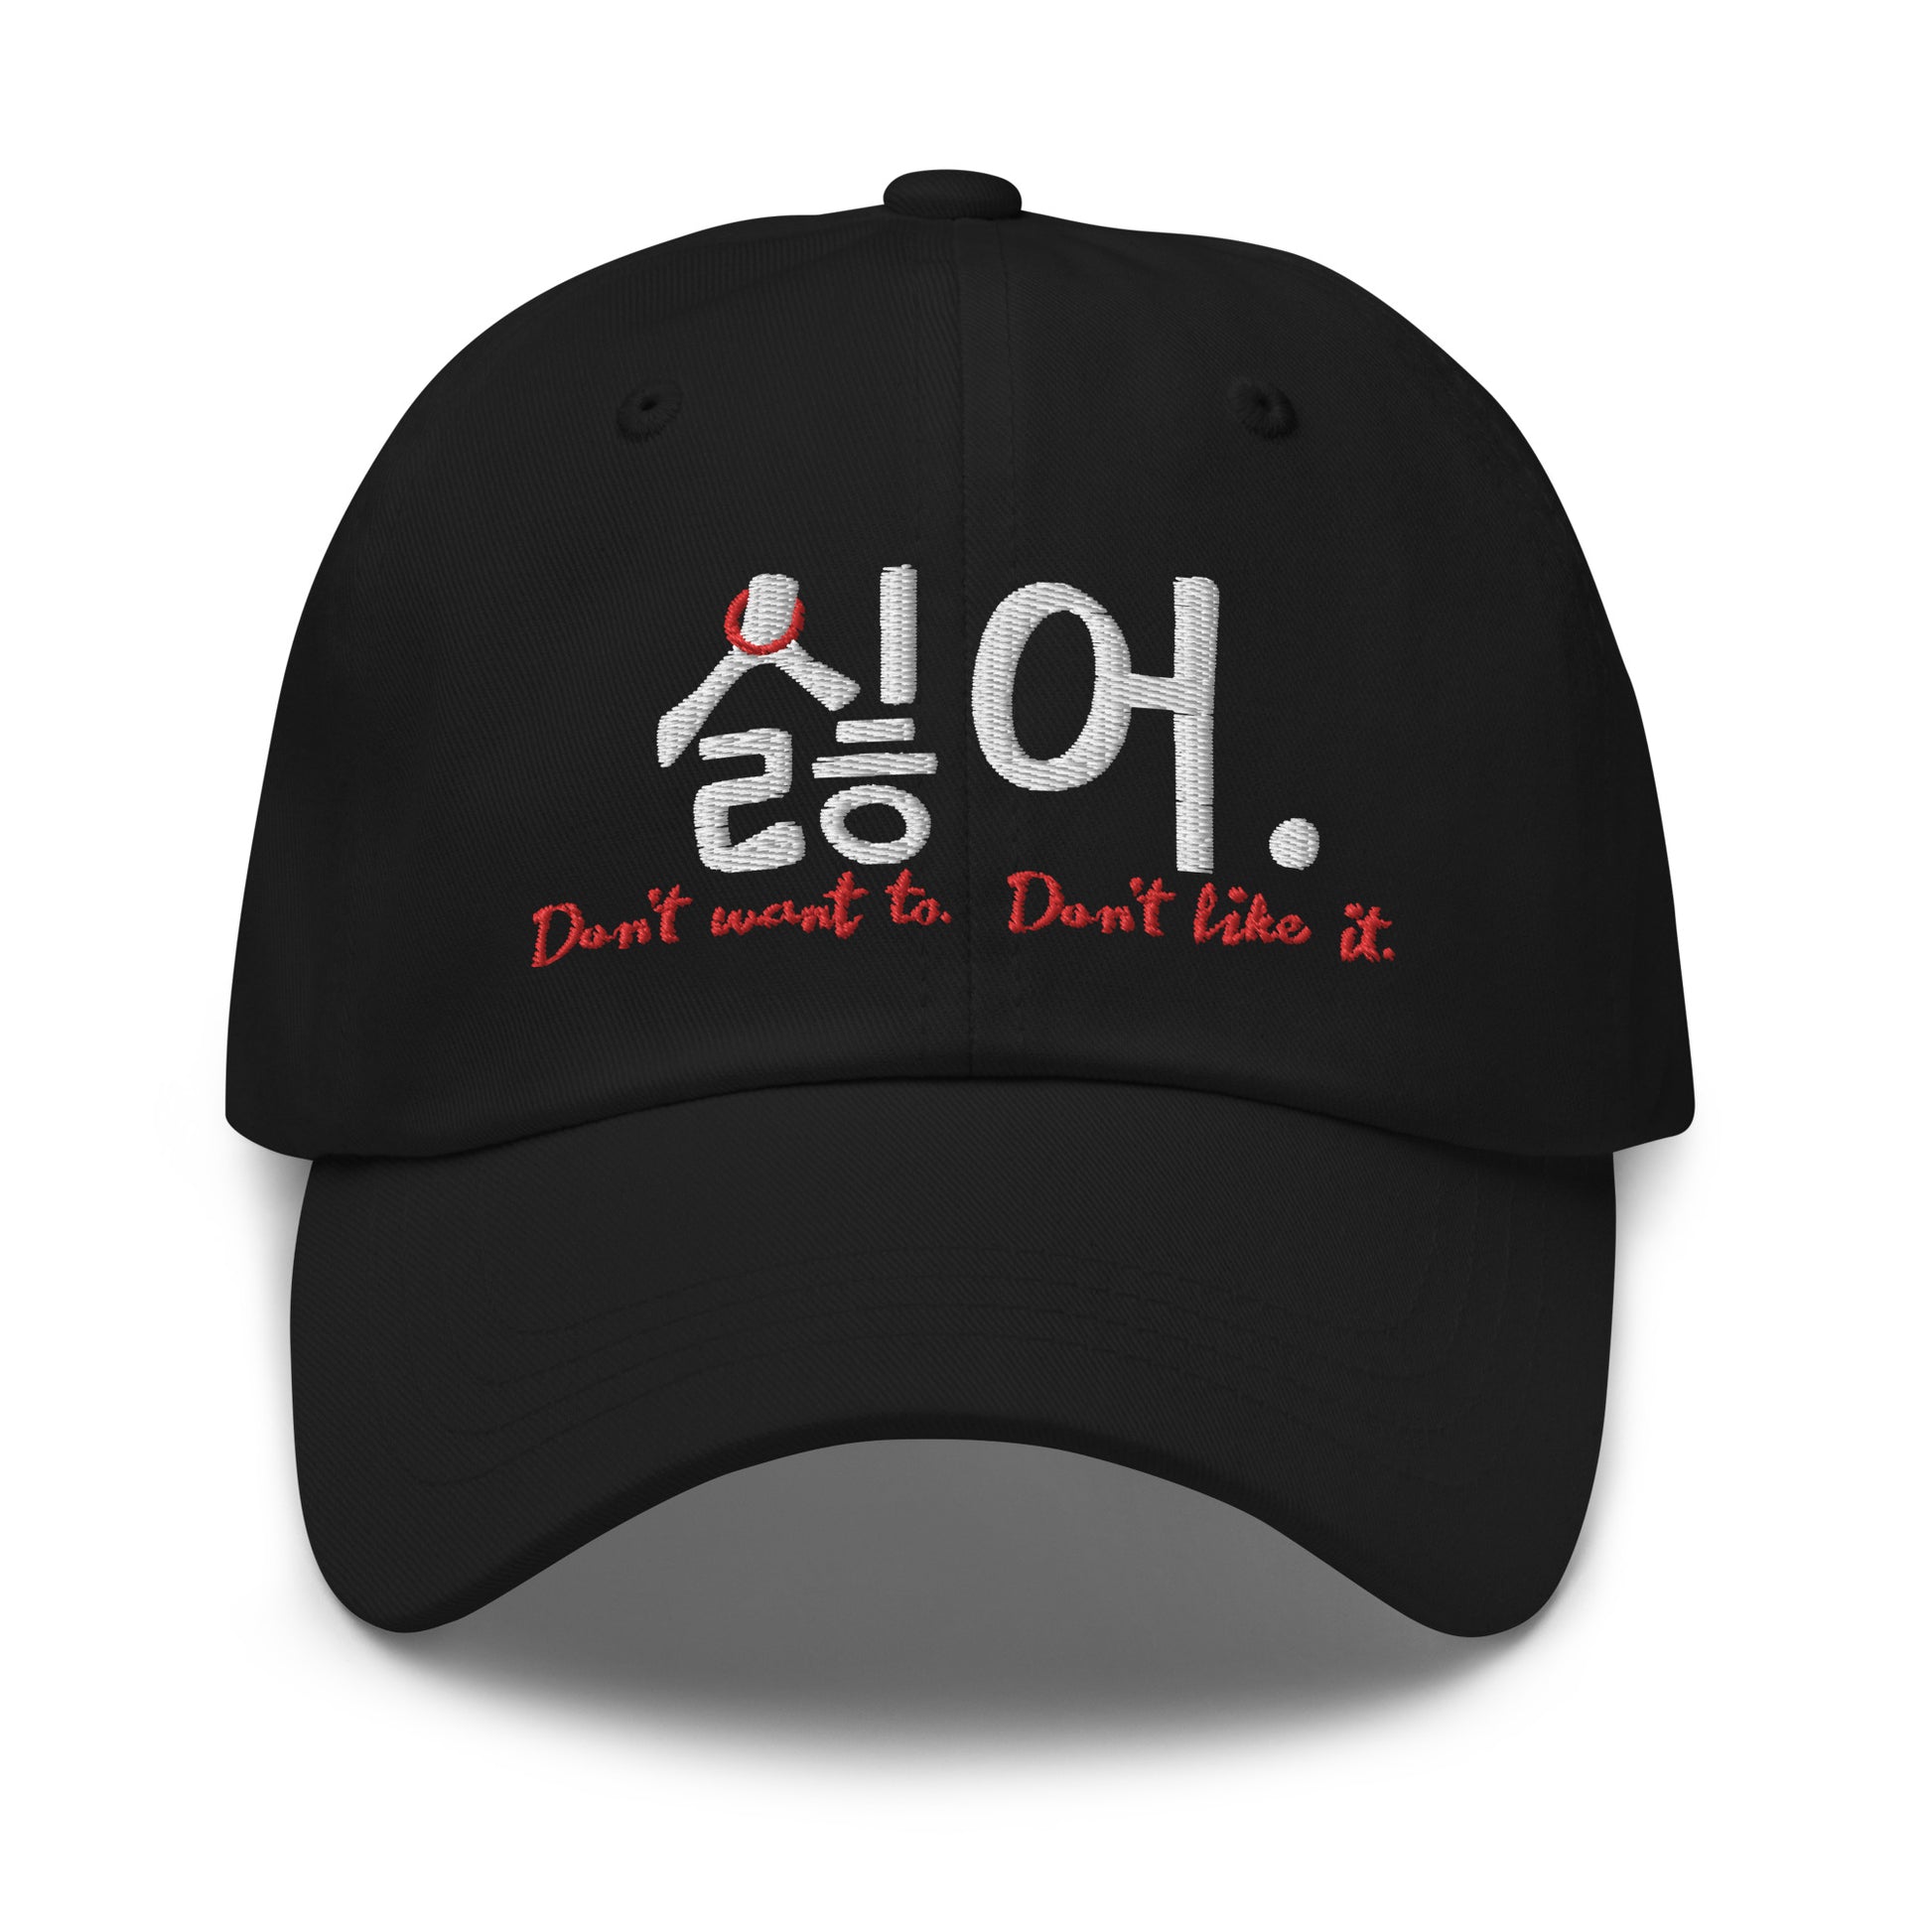 Black baseball cap with the phrase 'Don't want to. Don't like it.' in Hangul and English embroidered on the front